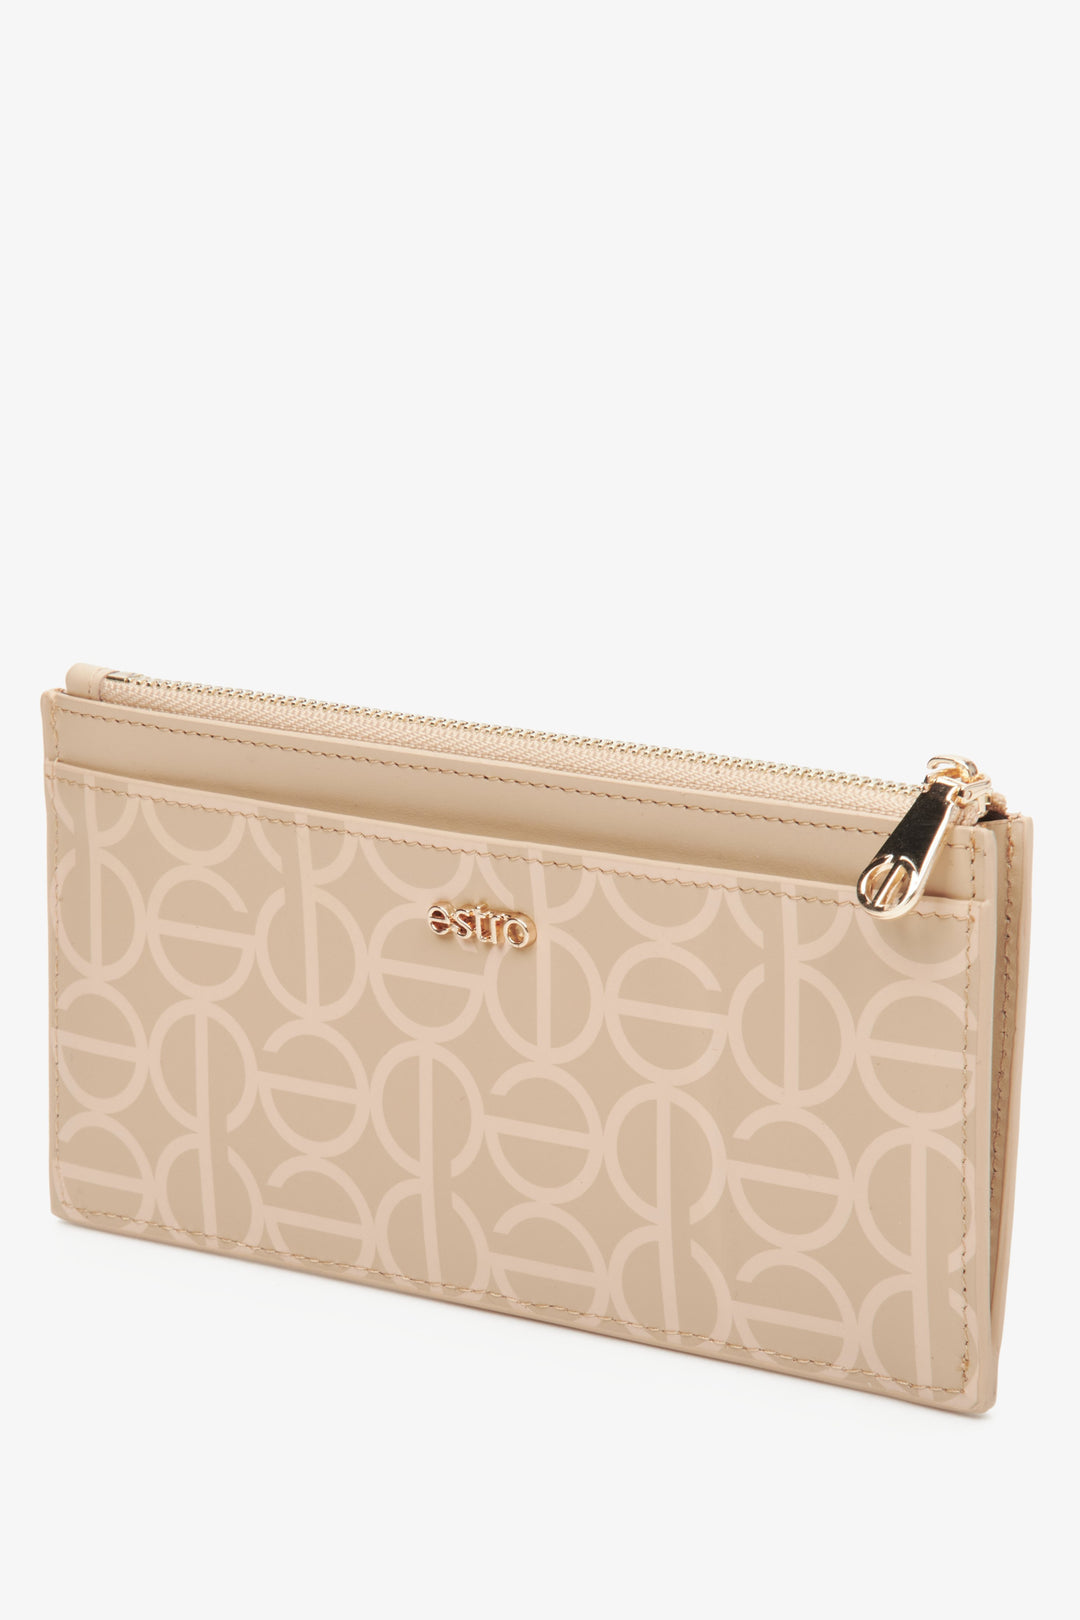 Stylish, large, women's beige wristlet by Estro, made of genuine leather with golden accents.